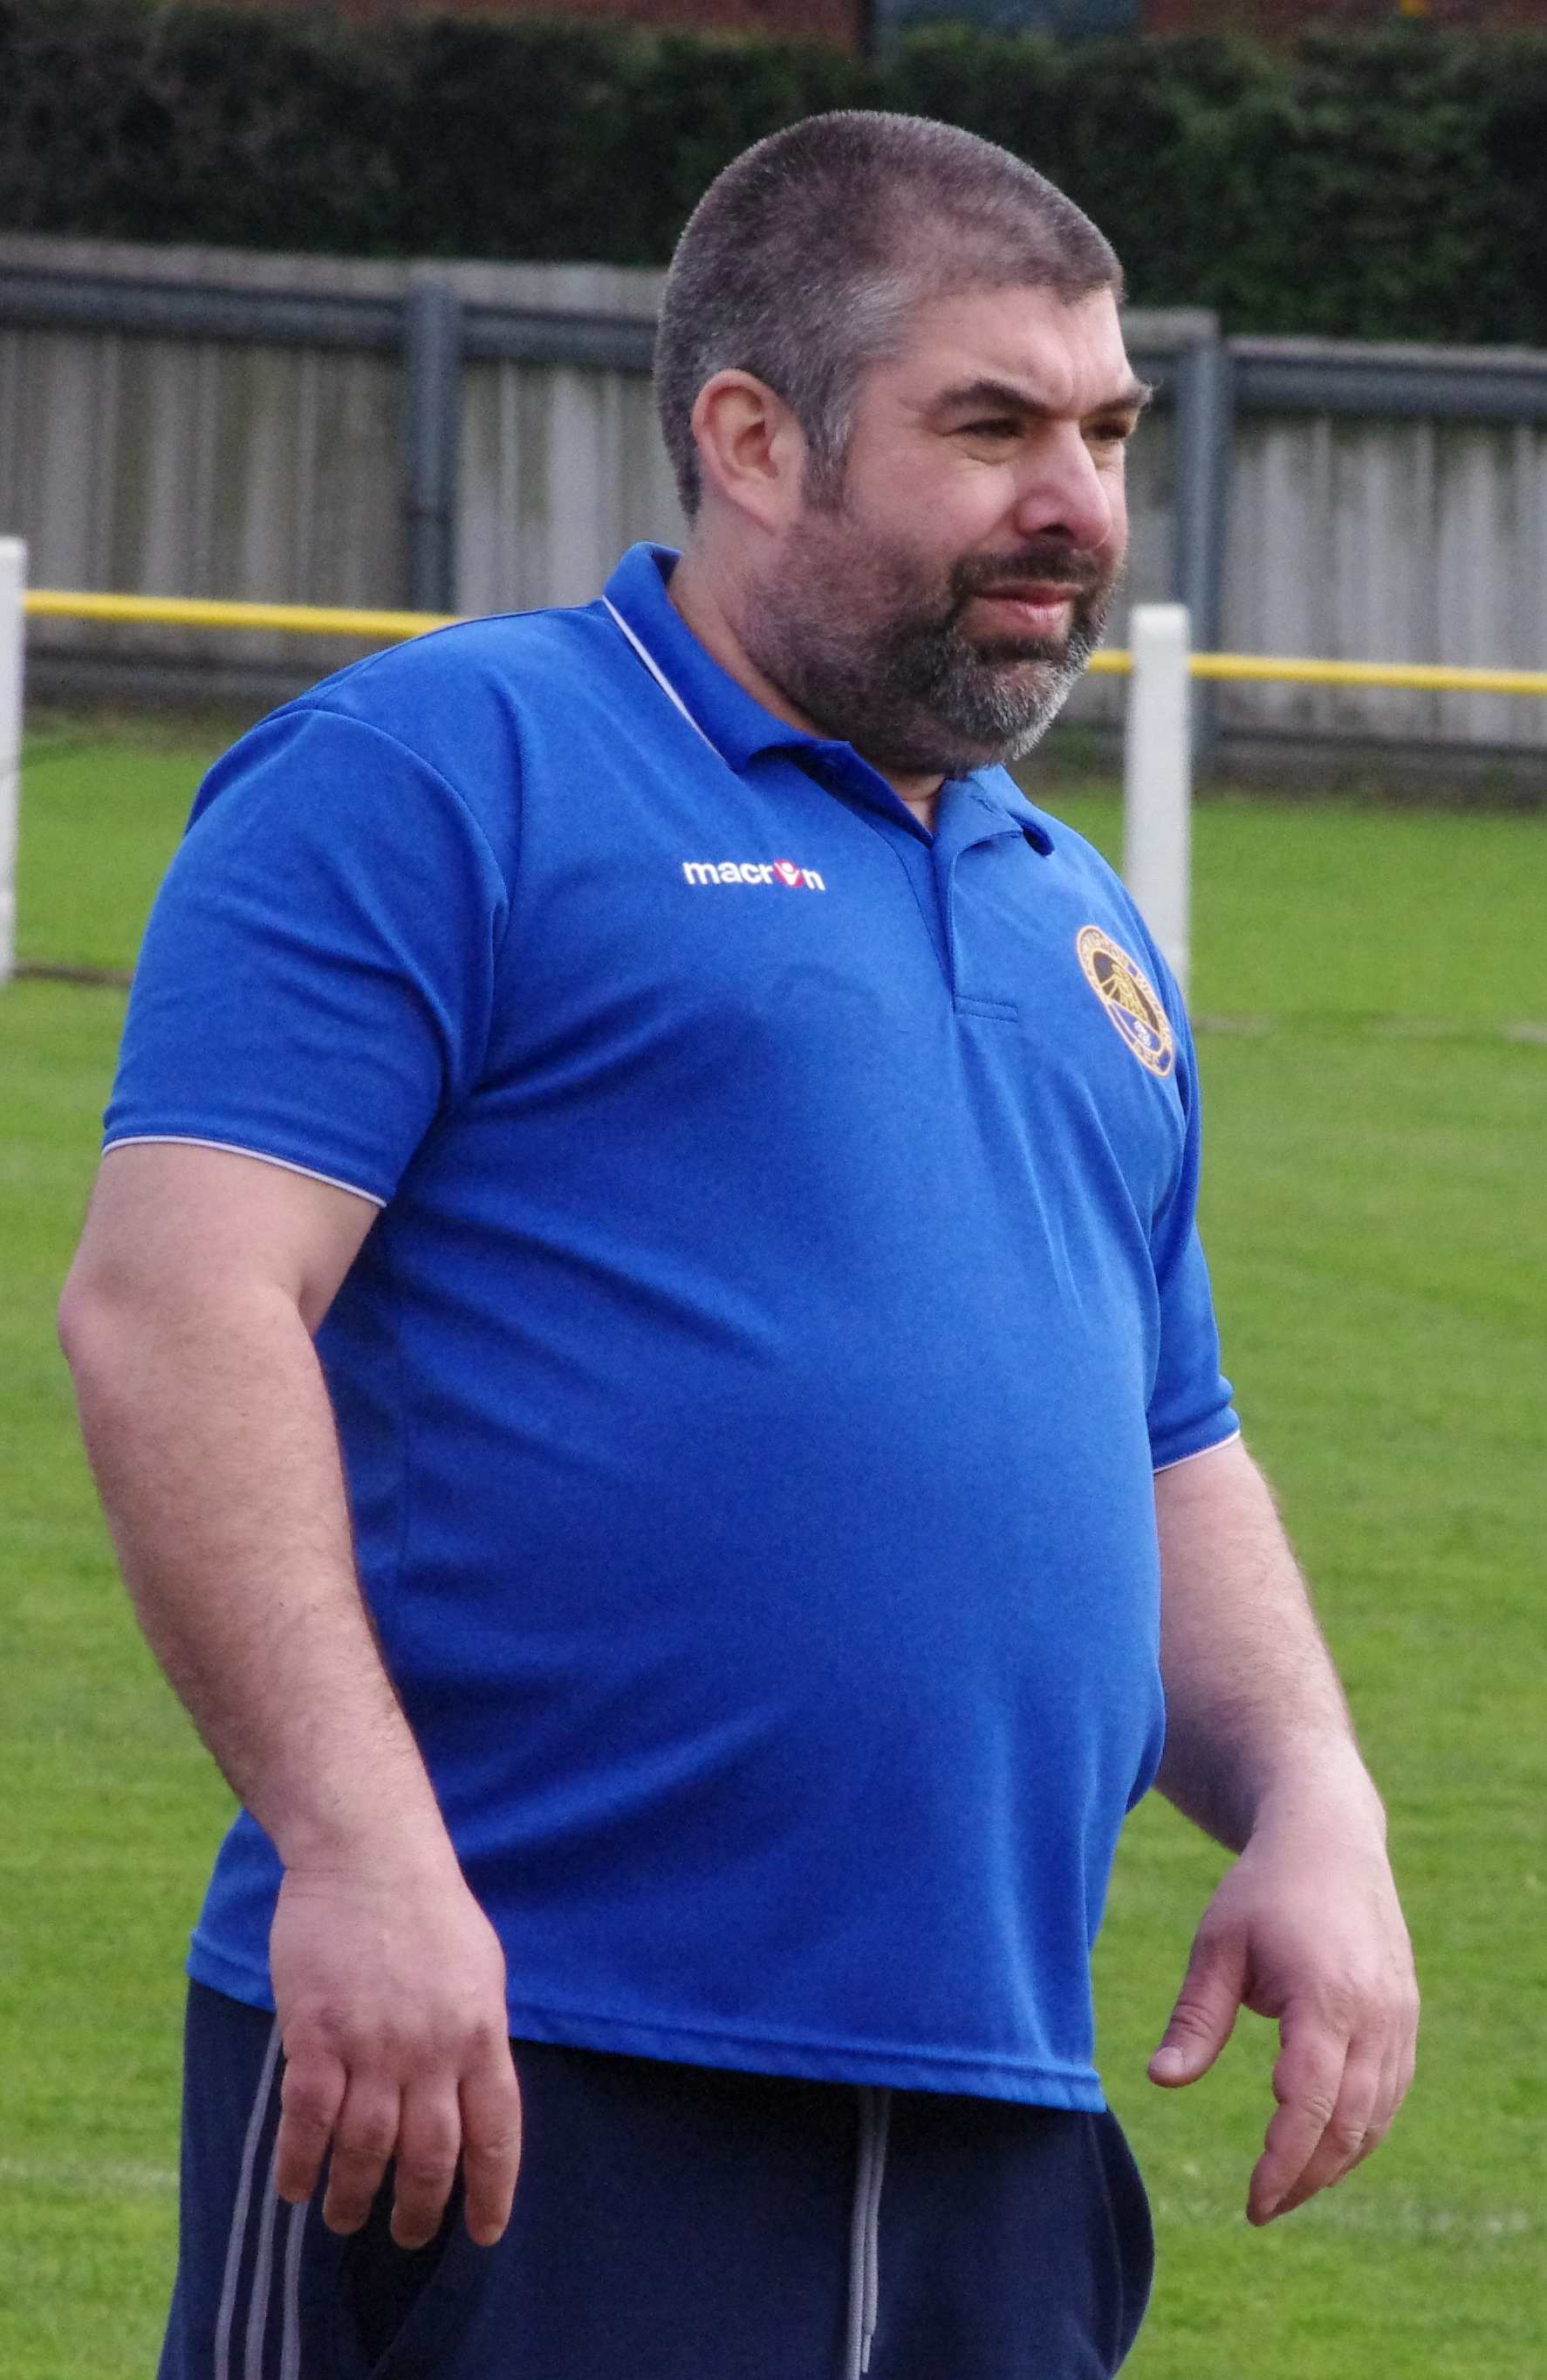 Jon Miles has been named as the permanent manager of Glasshoughton Welfare